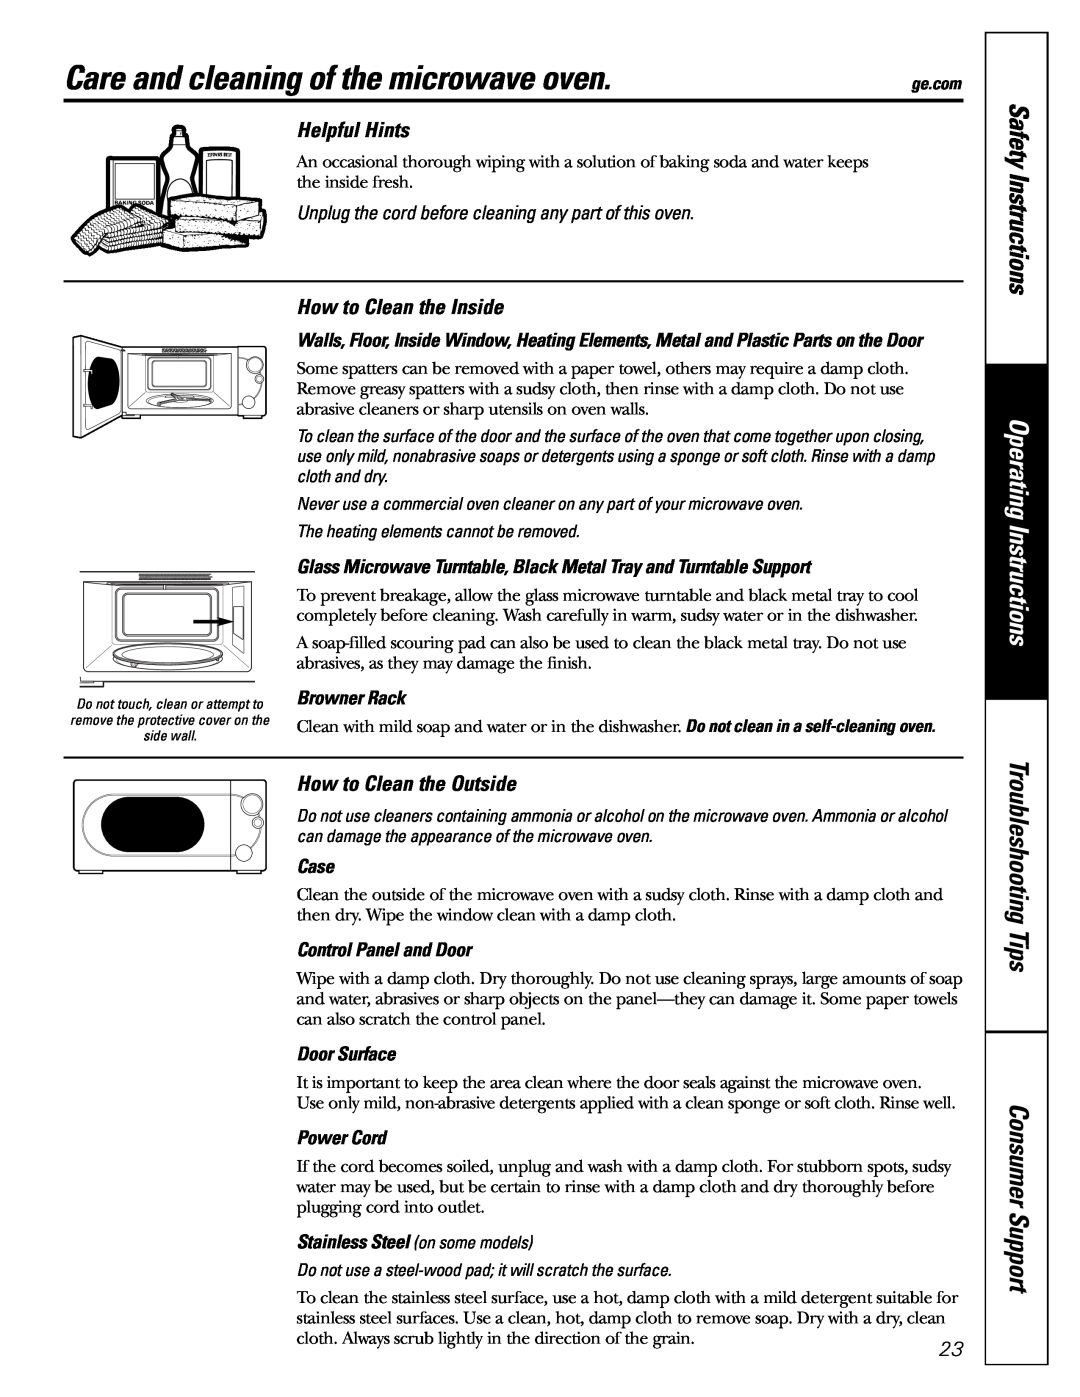 GE JES1288 Care and cleaning of the microwave oven, Operating Instructions, Troubleshooting Tips Consumer Support, Case 